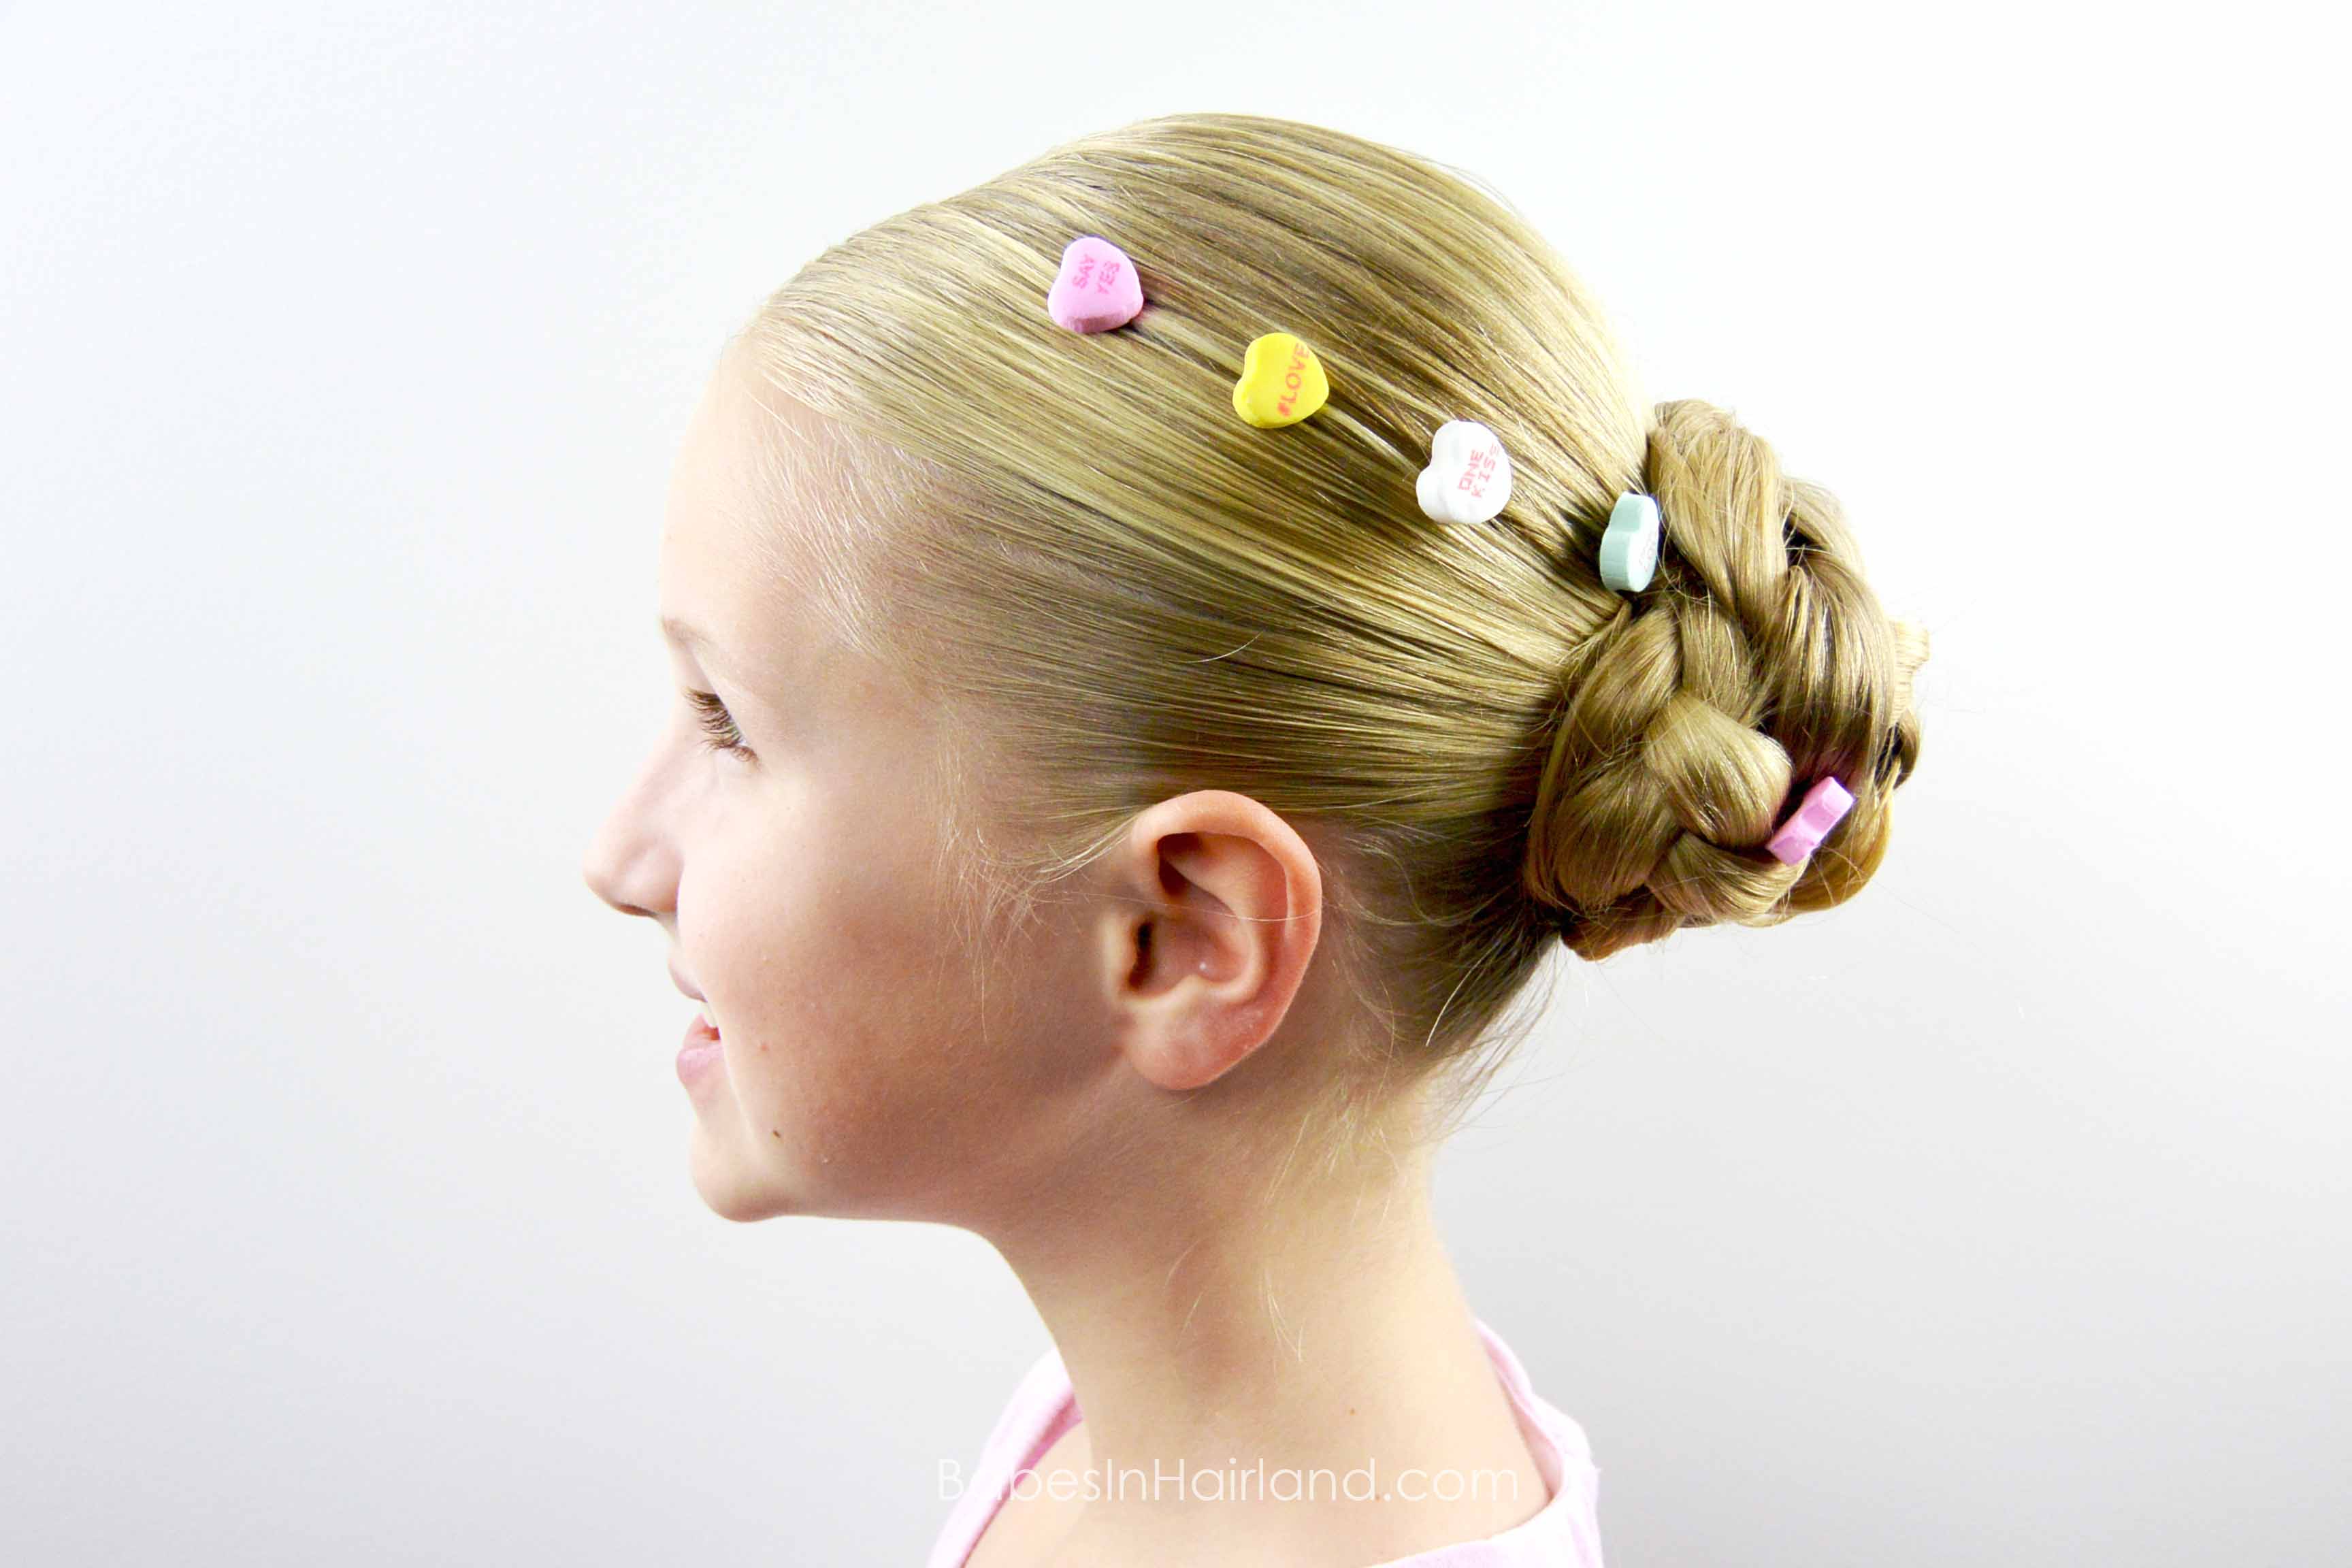 Make your own cute candy hair pins (quick & easy!) 